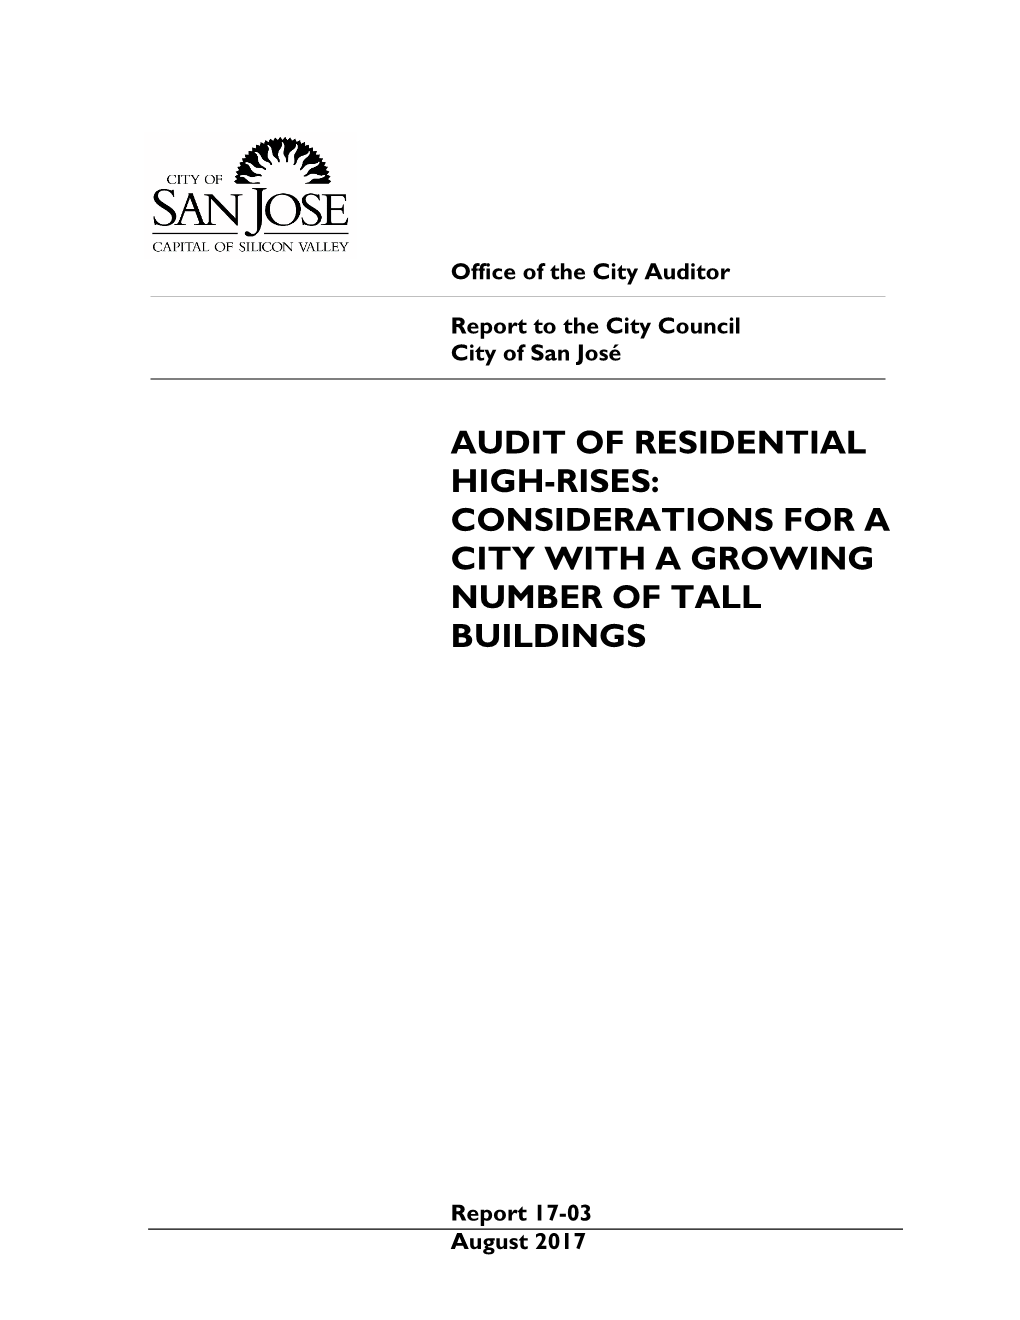 Audit of Residential High-Rises: Considerations for a City with a Growing Number of Tall Buildings